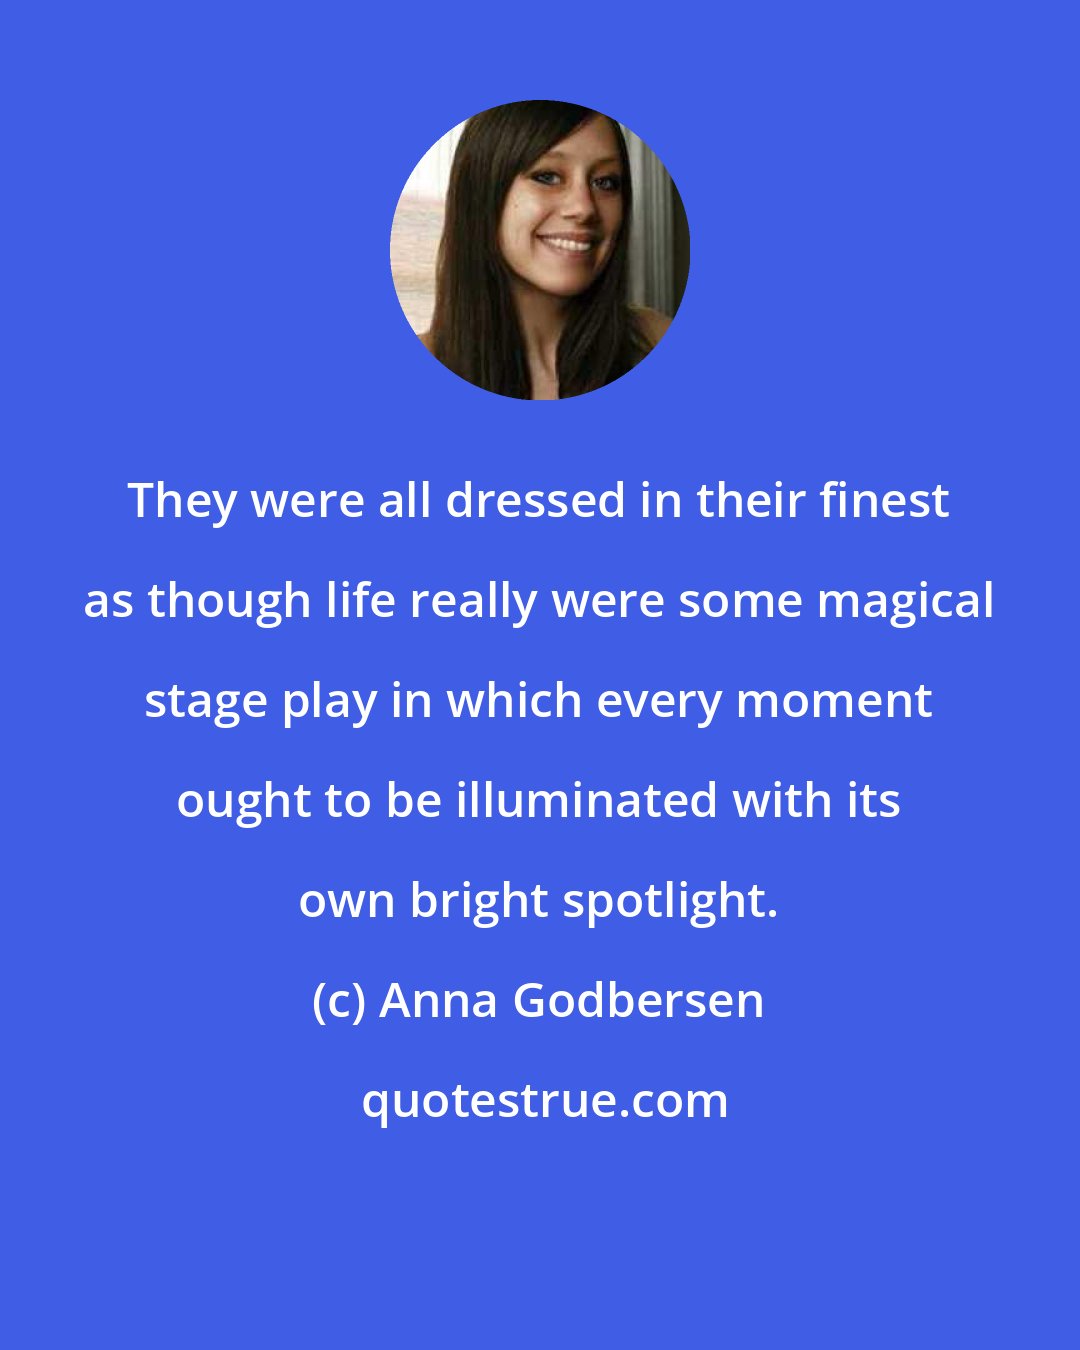 Anna Godbersen: They were all dressed in their finest as though life really were some magical stage play in which every moment ought to be illuminated with its own bright spotlight.